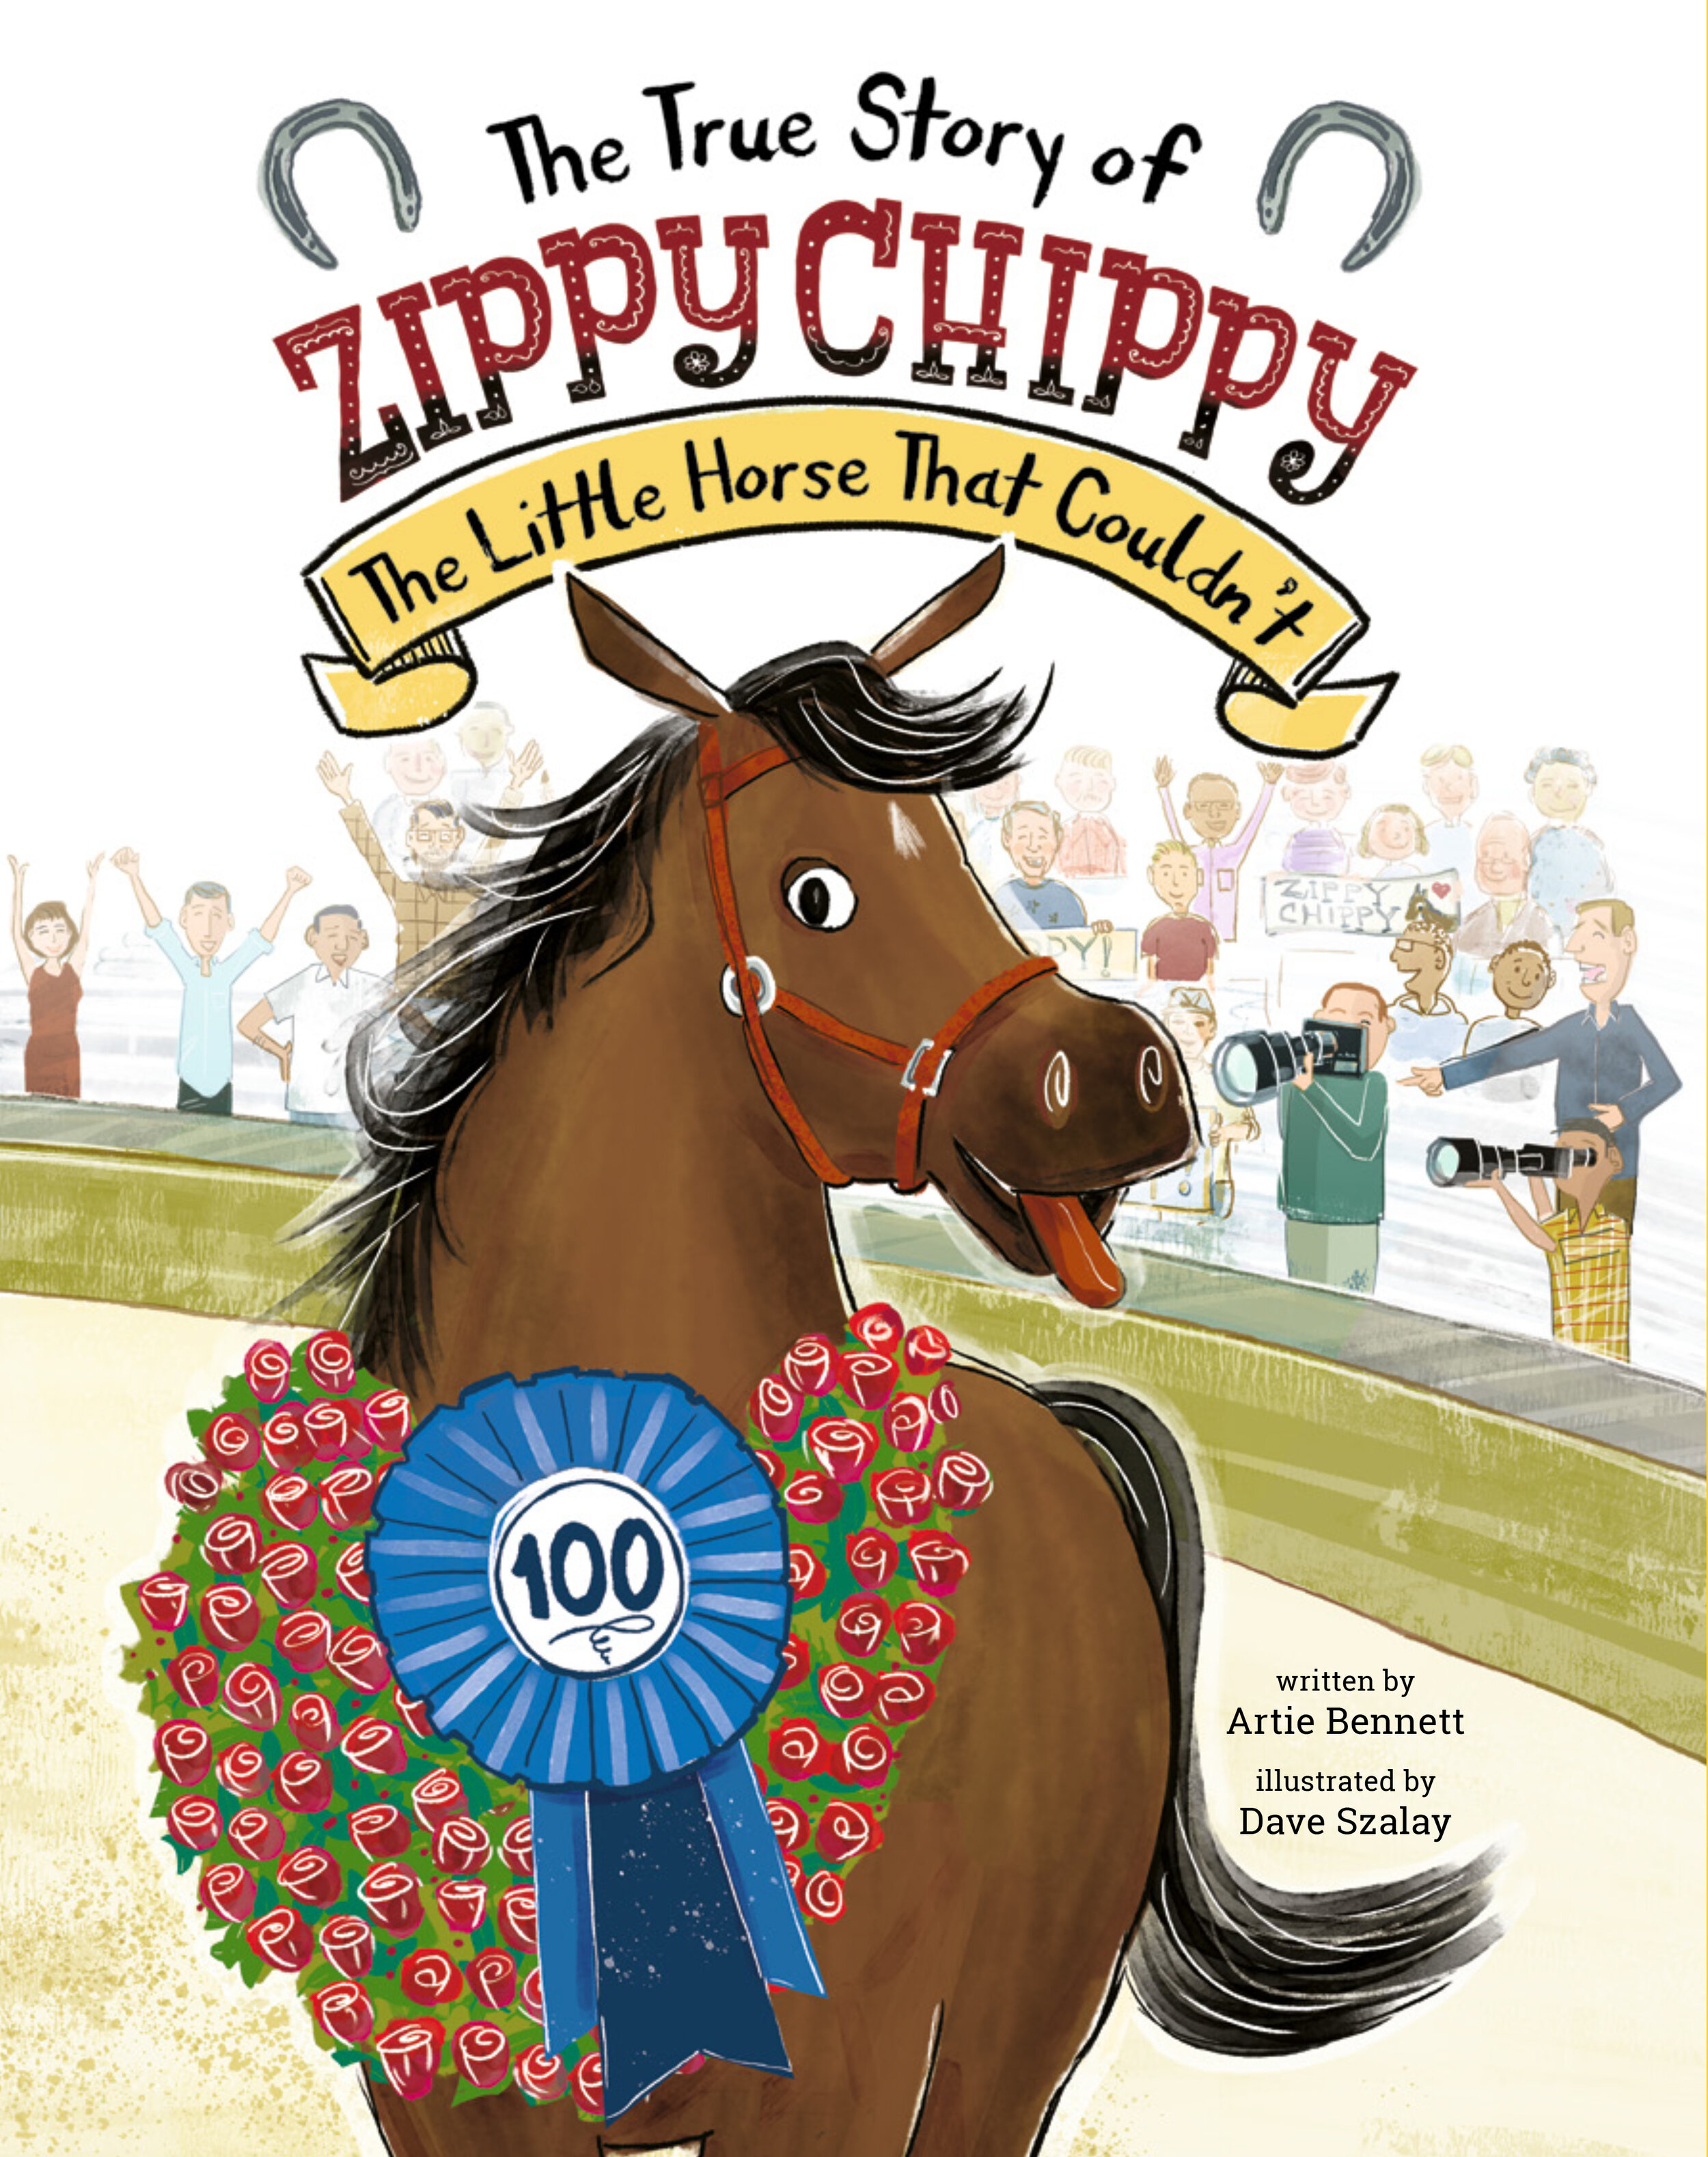 The True Story of Zippy Chippy, The Little Horse That Couldn't. (Bennett and Szalay)